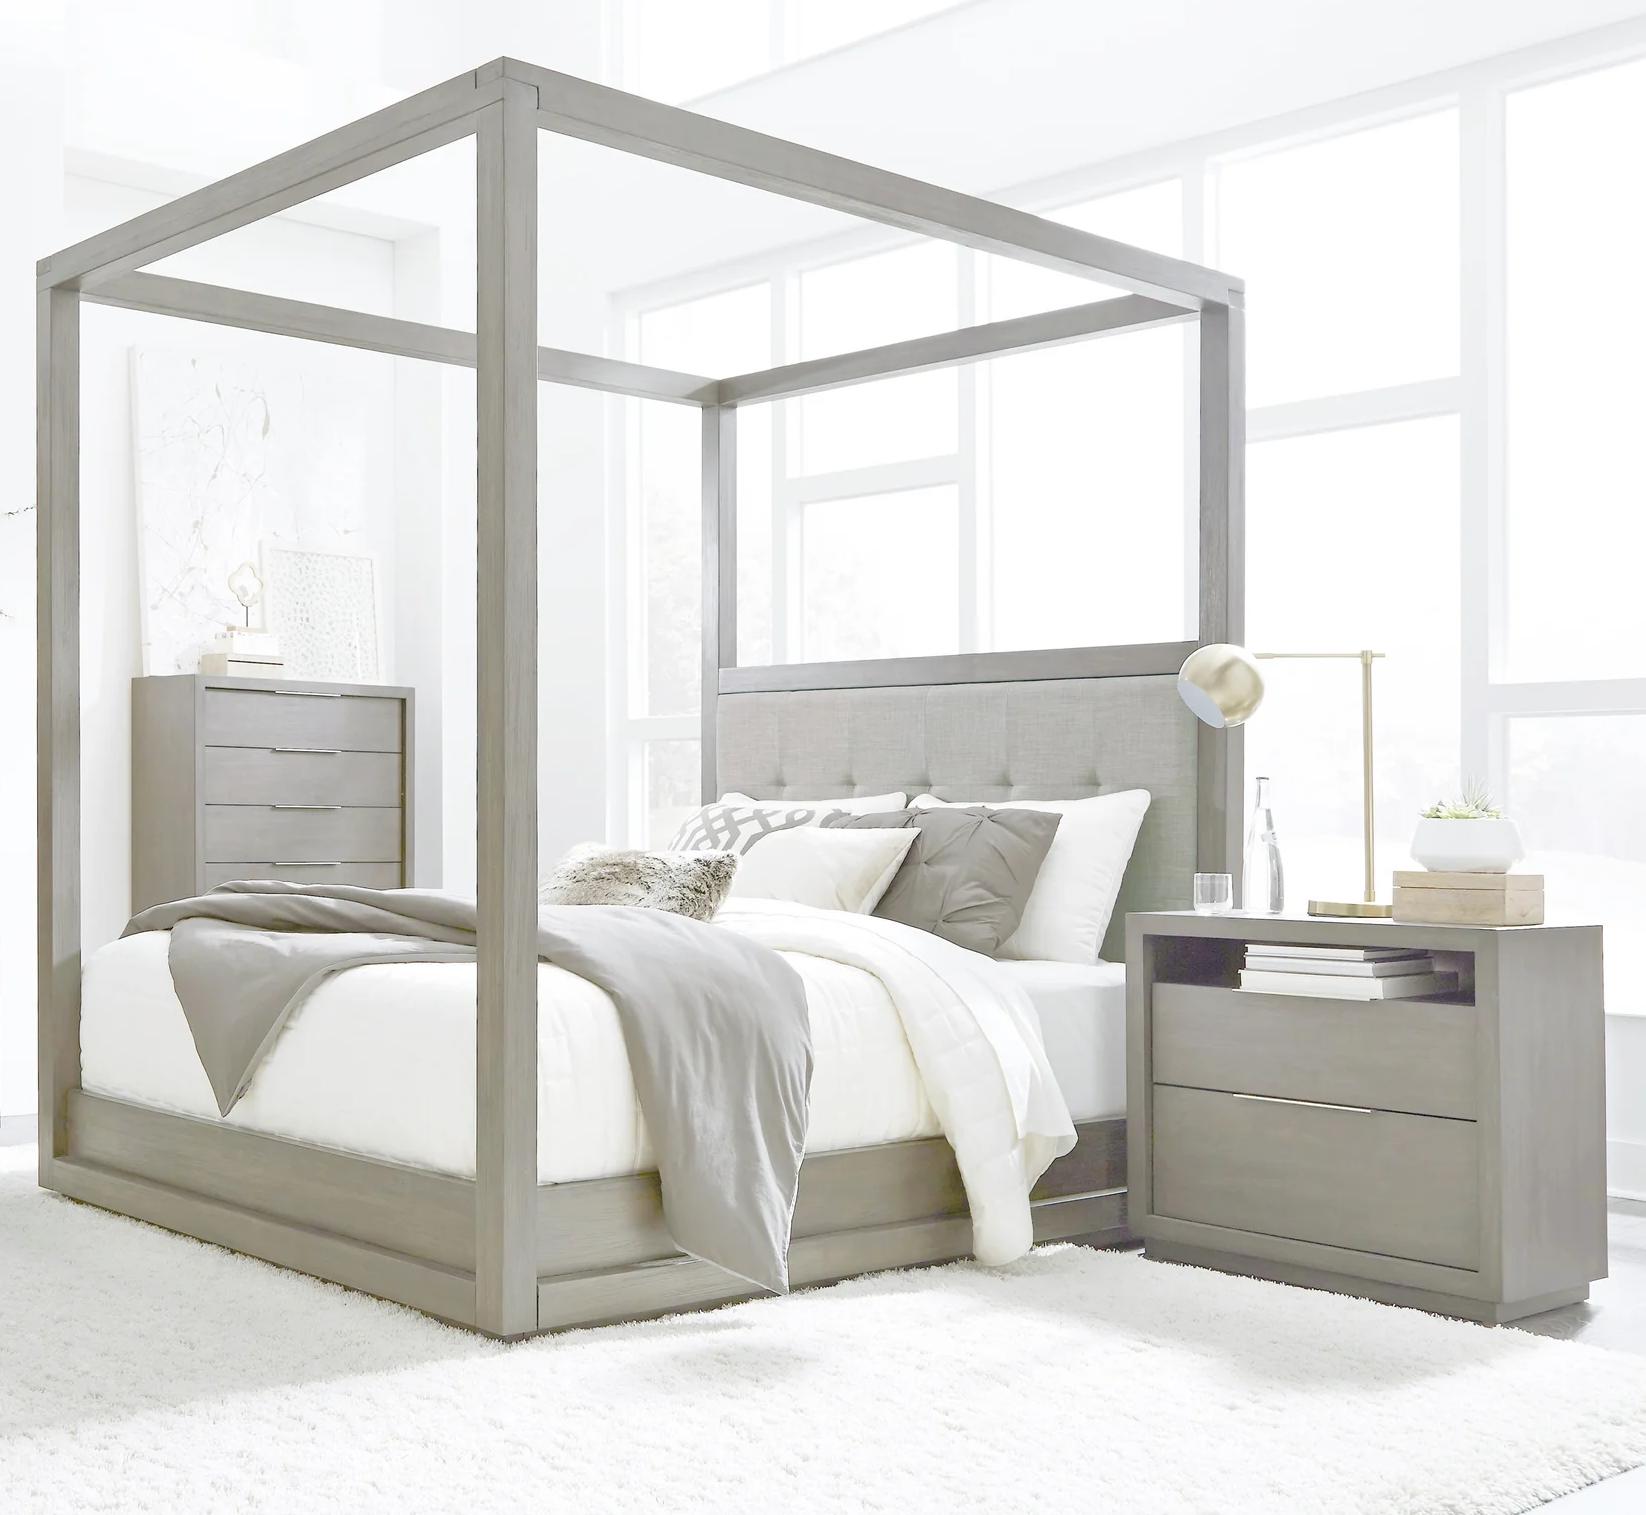 Contemporary Canopy Bedroom Set OXFORD CANOPY AZBXH5-2N-3PC in Light Gray, Stone Fabric